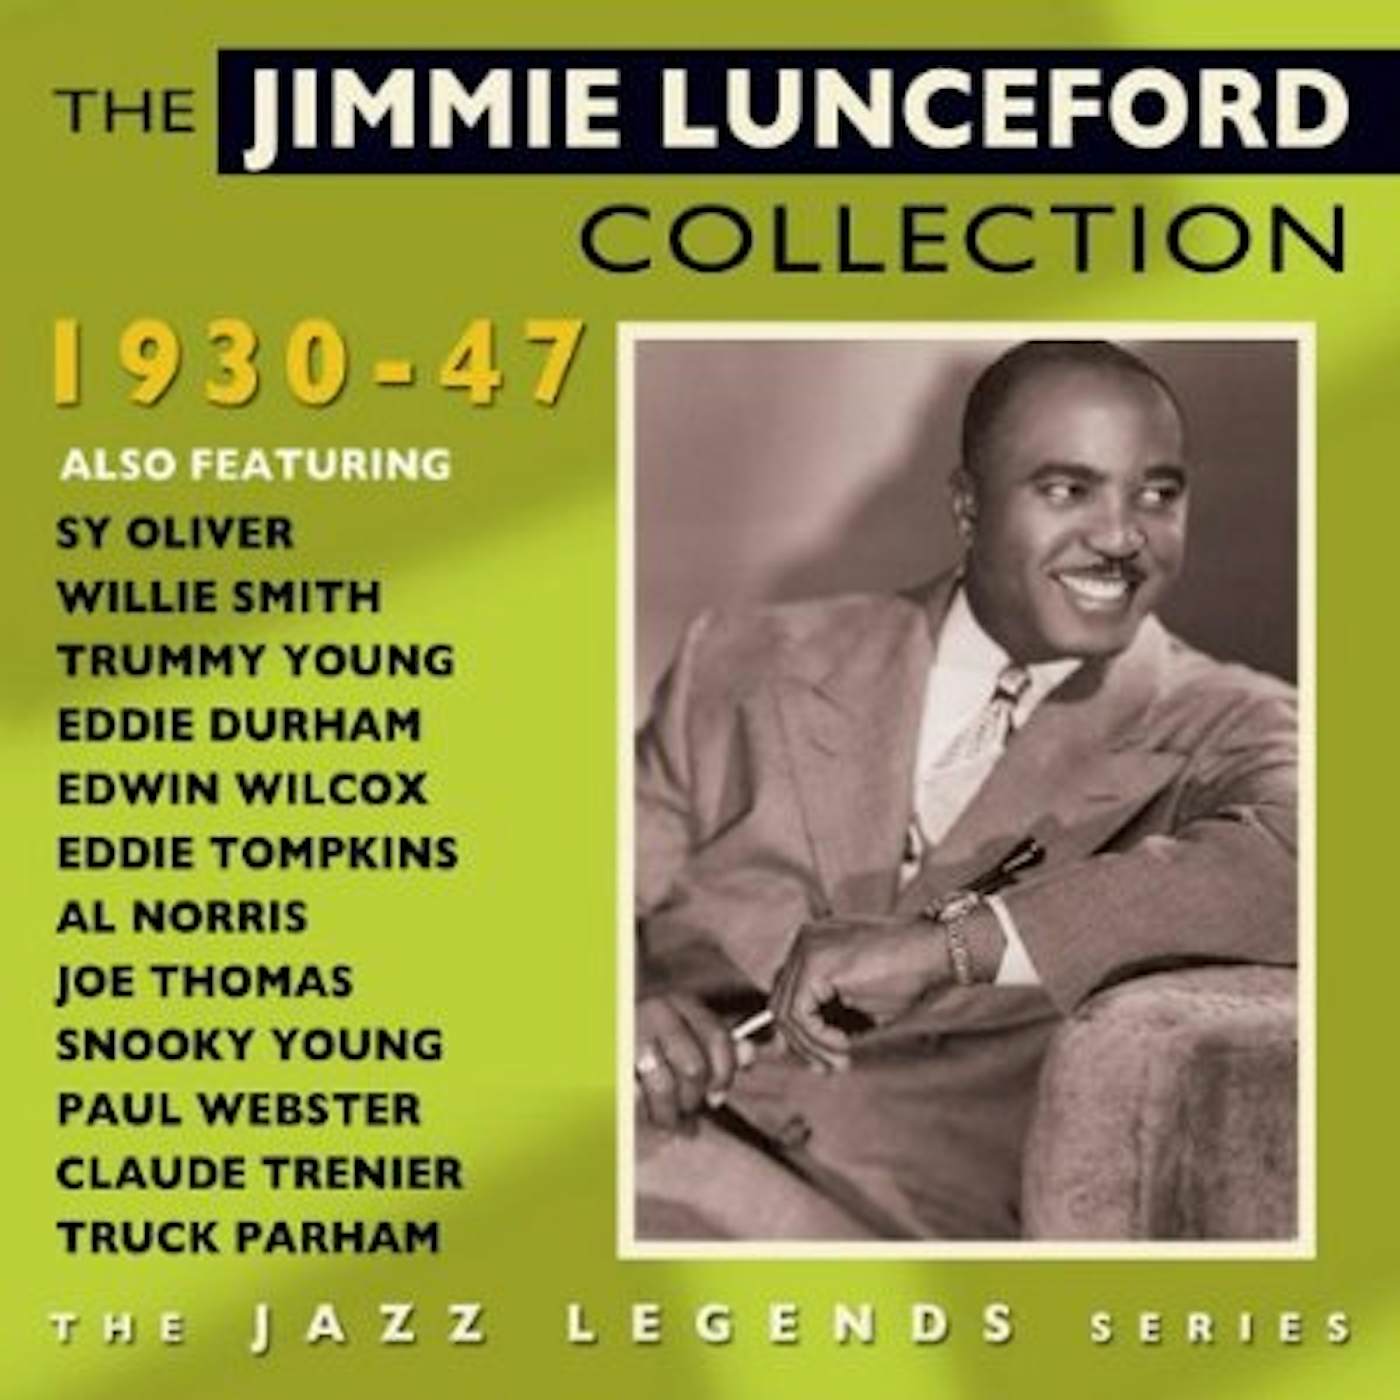 Jimmie Lunceford COLLECTION 1930-42 CD